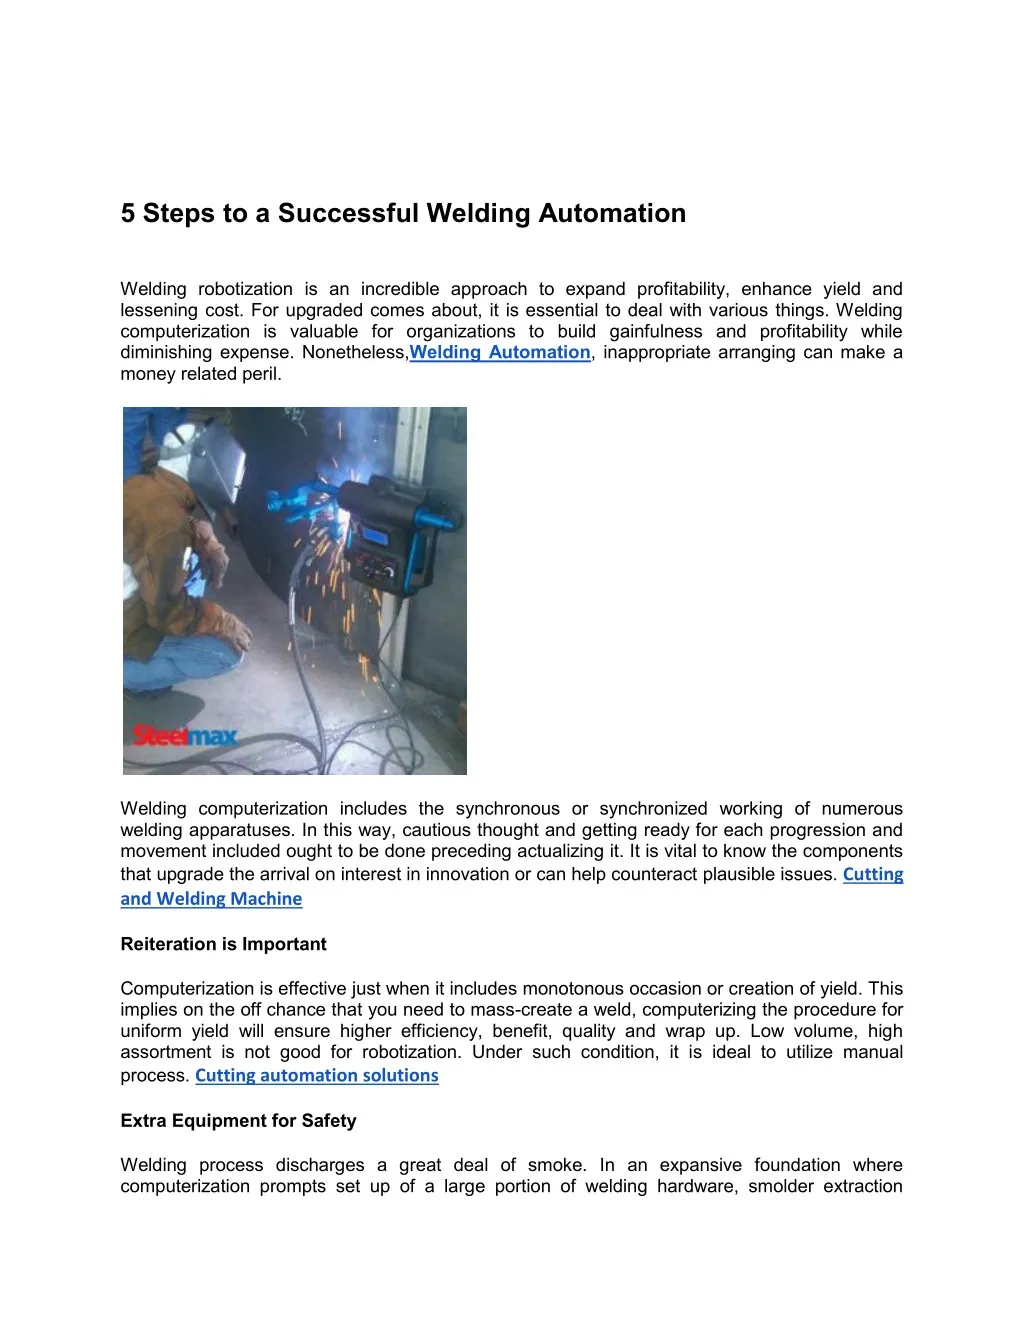 5 steps to a successful welding automation